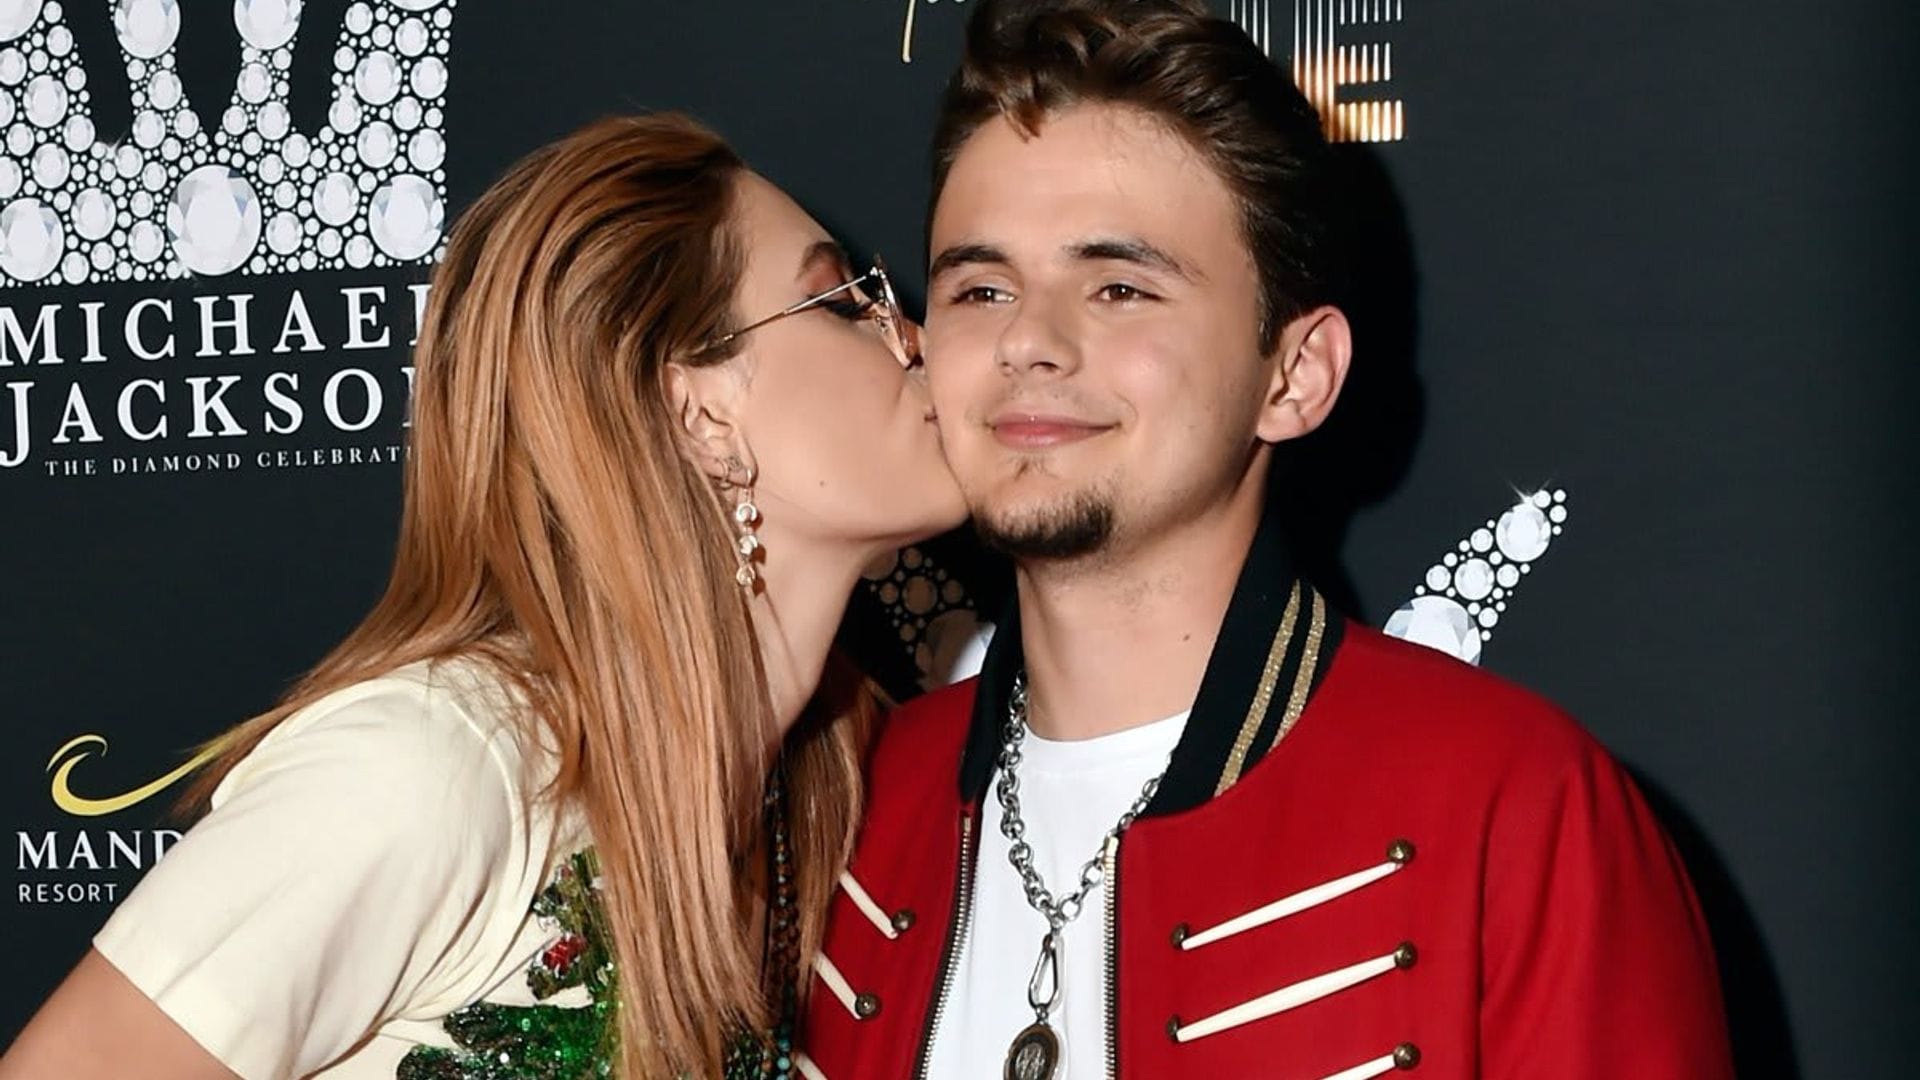 Prince Jackson congratulated his ‘lil sister’ Paris Jackson for her 23rd birthday